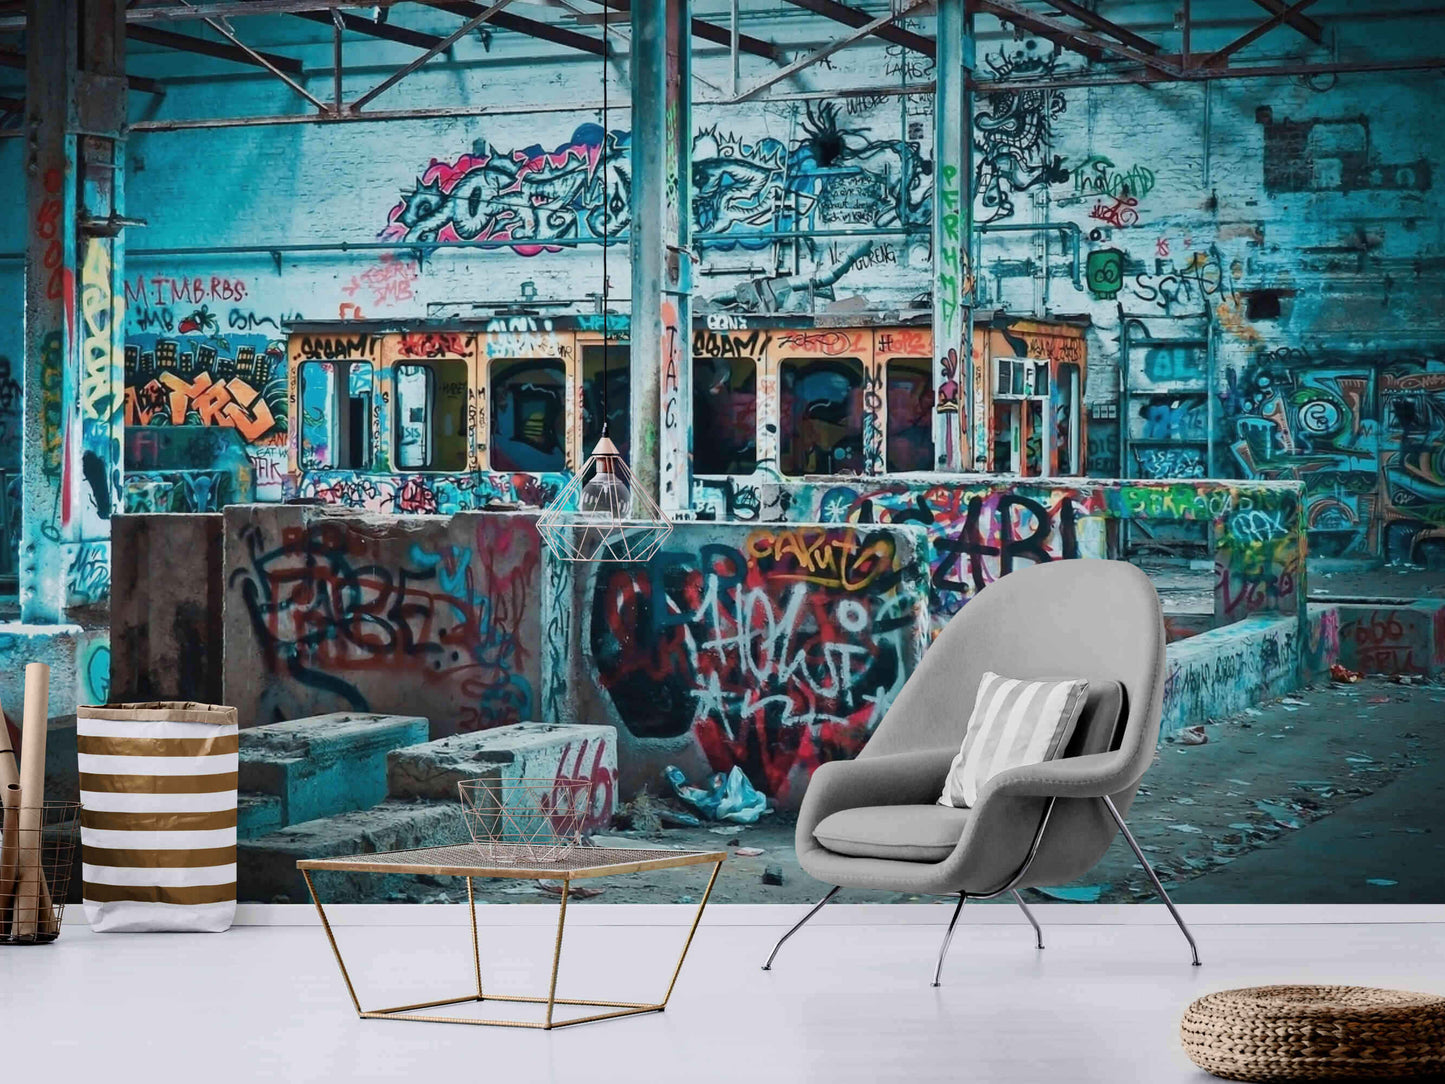  Cool urban tags and abstract graffiti in a calming blue wallpaper